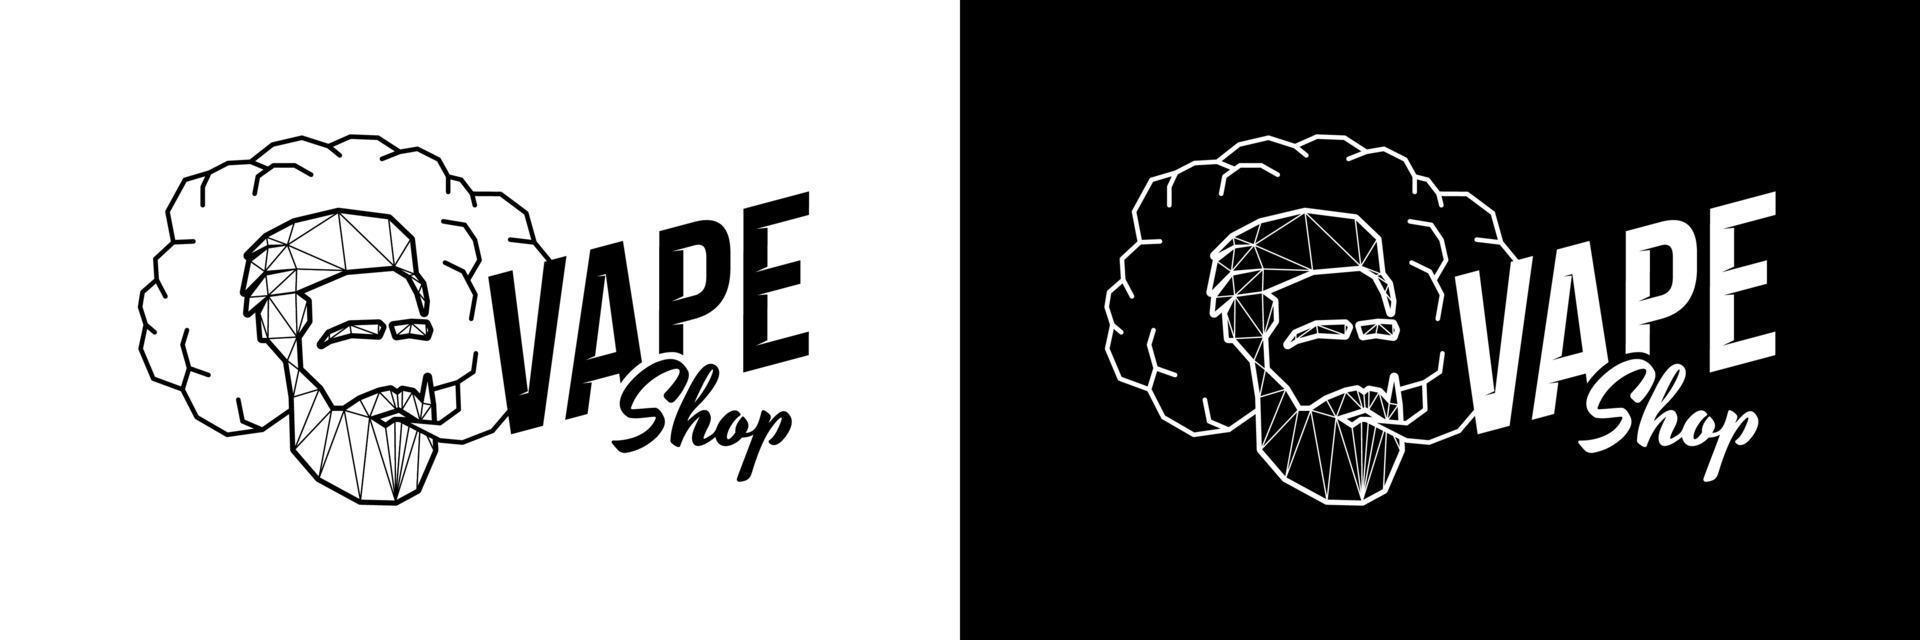 Vape shop polygonal logo. Hipster exhales vaporizer smoke cloud. Linear abstract triangle low poly style logotype for electronic cigarette store. E-cigarette vaping seller badge vector design template